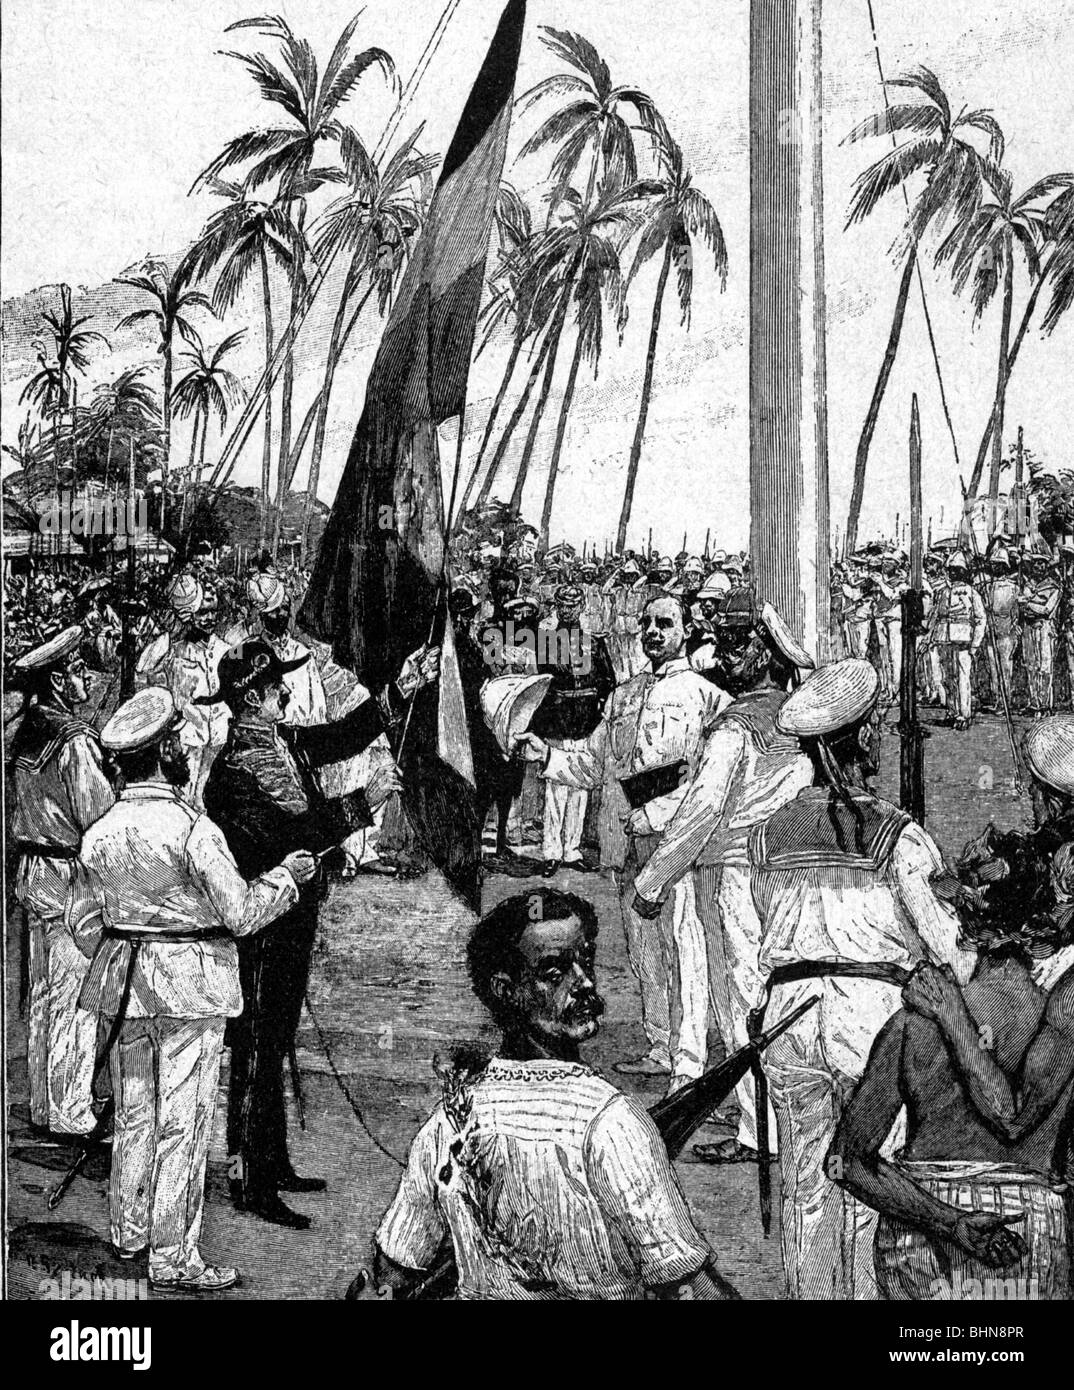 Geo. hist., South Sea, Samoa, West Samoa, occupation by the Germans, hauling up the flag, Apia, contemporary wood engraving, 1.3.1900, 20th century, historic, historical, German dependency, dependencies 1889-1900, polynesia, Upolo Island, German colony 1900-1919, flags, colonialism, imperialism, Imperial Era, Imperial Period, German Empire, Oceania, navy, Reich, 1900s, people, Stock Photo